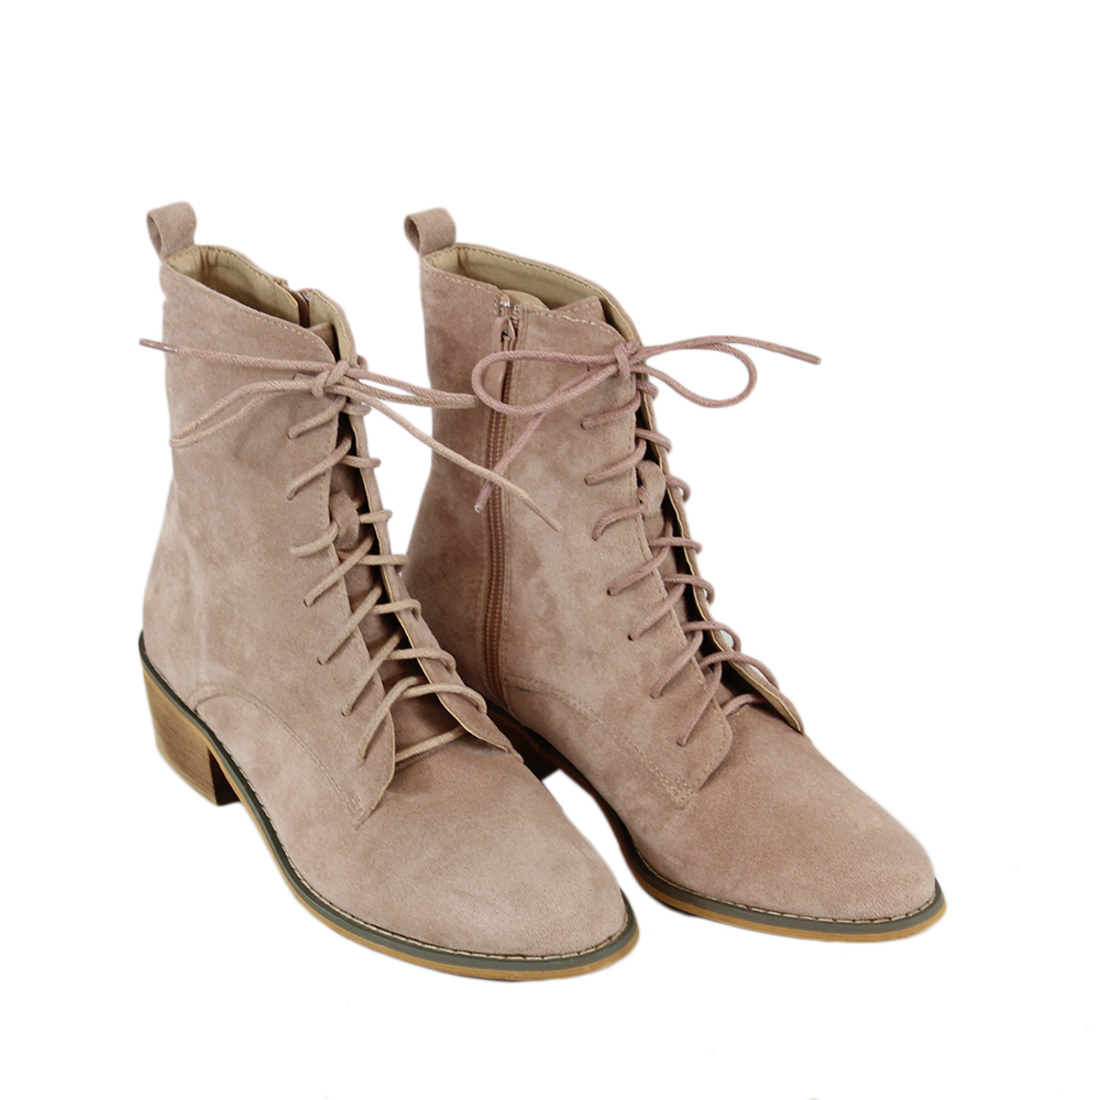 * Suede leather lace-up flat ankle boots